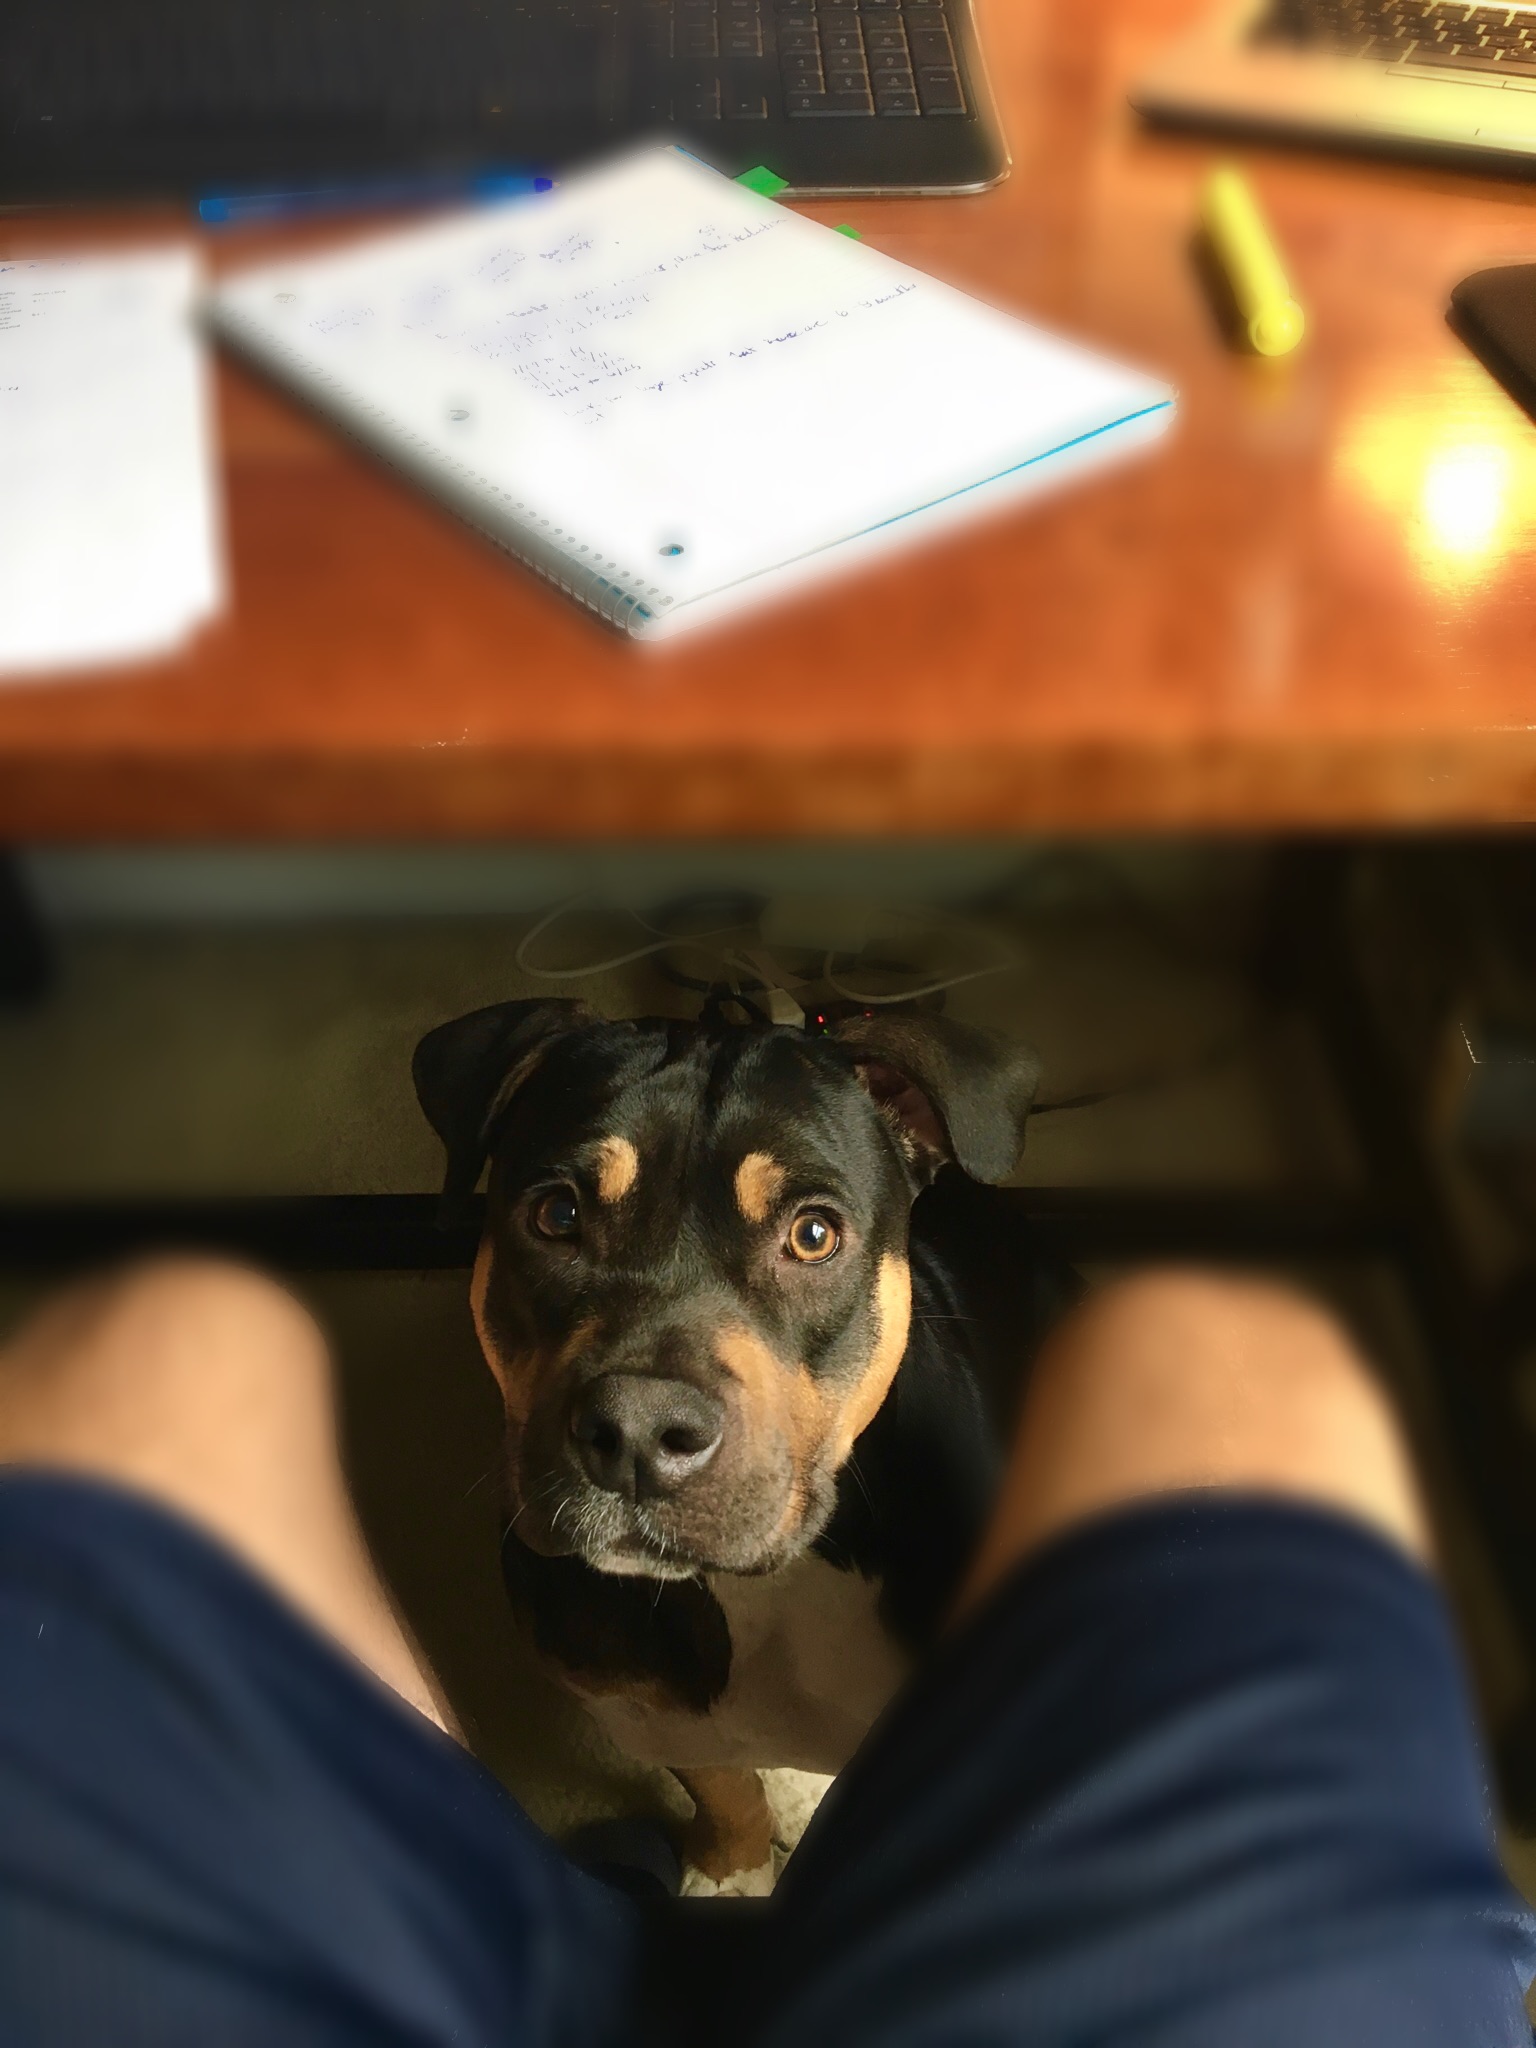 “Helping” Dad work from home